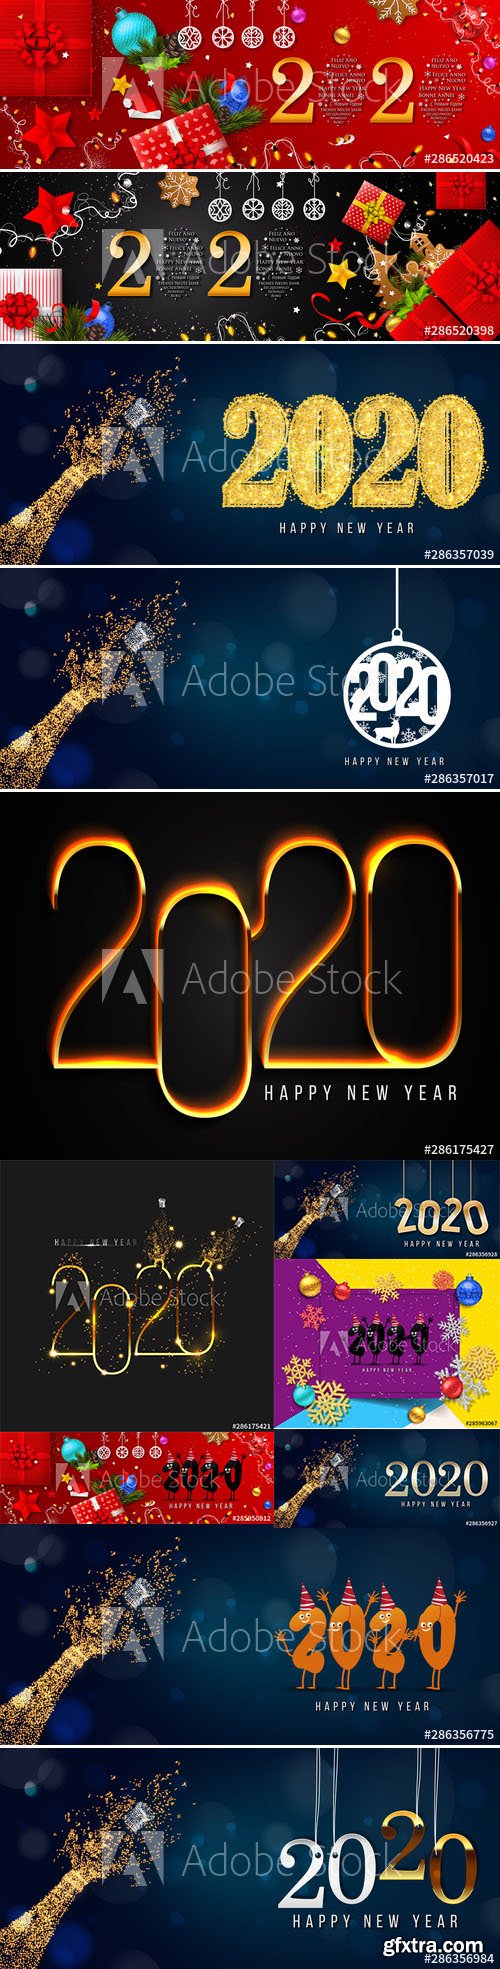 2020 Happy New Year Greeting Card and New Year Background vol.4